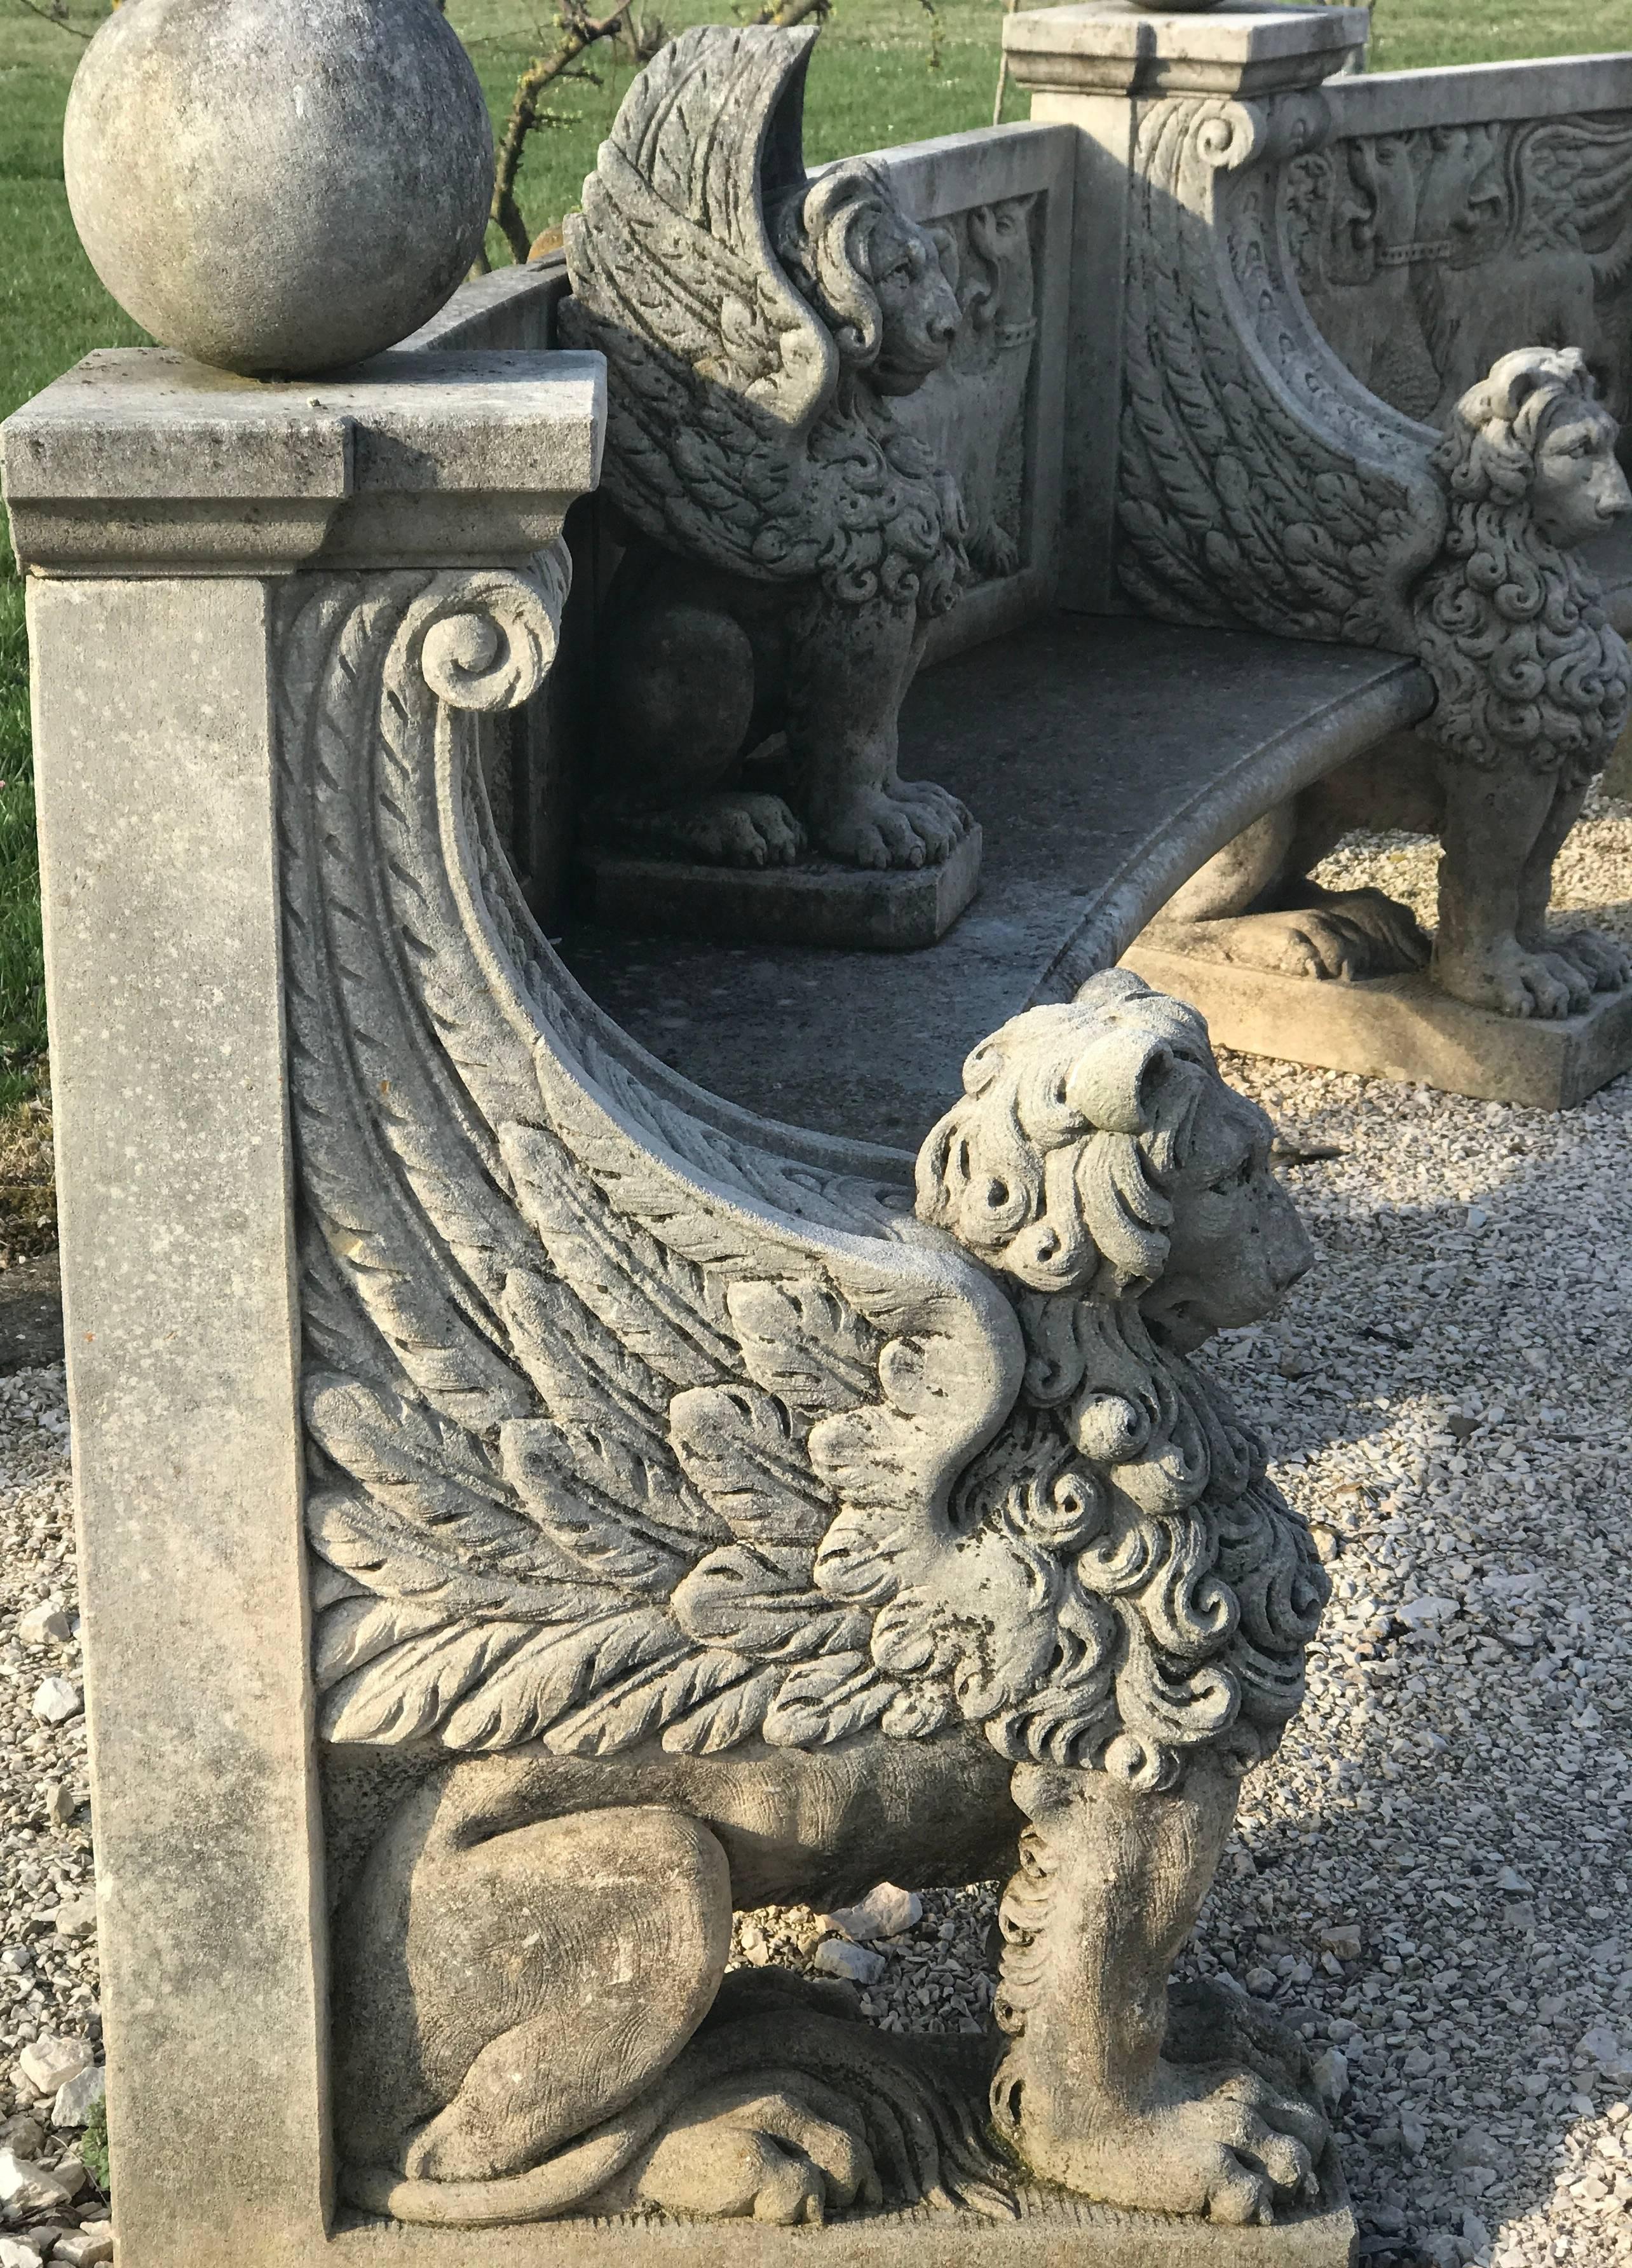 Of exceptional craftsmanship with stunning motifs in relief in ' Pietra di Vicenza'. Rich decoration of the armrest with Griffins and other fantastic animals.
Excellent vintage condition.
It was part of a lush garden of a Venetian Villa.